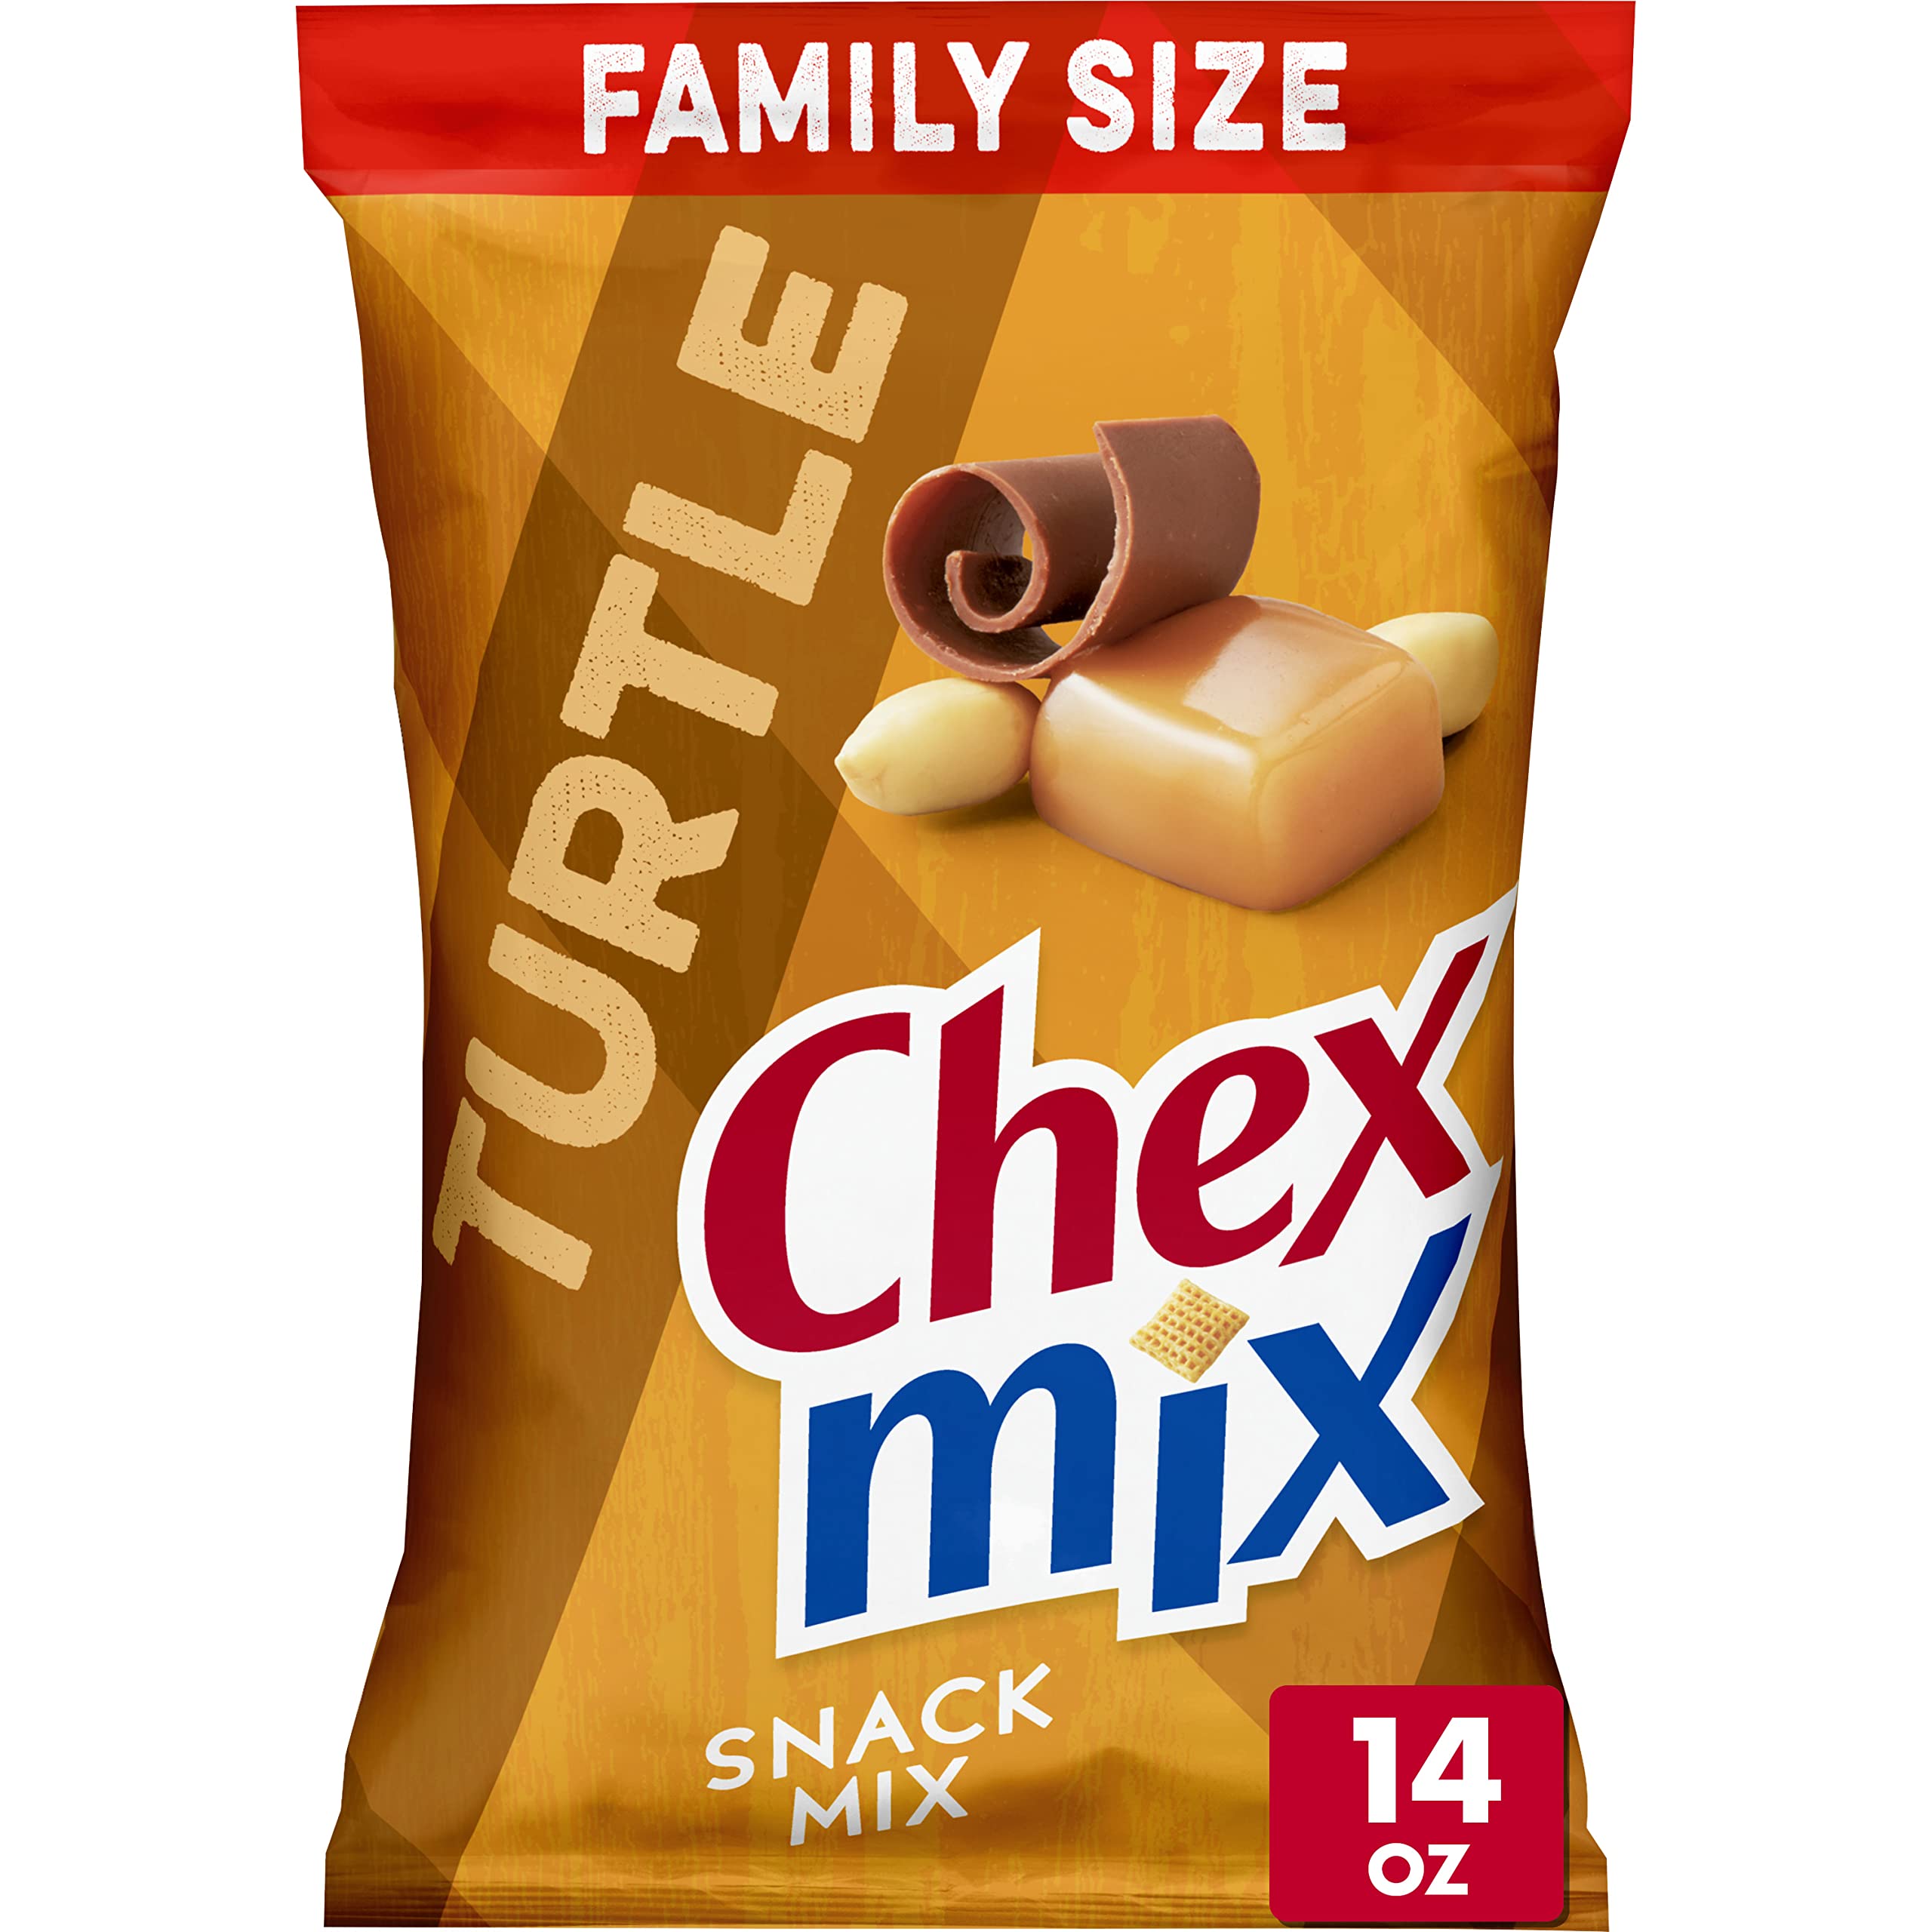 14-Oz Family Size Chex Mix Snack Mix (Turtle) $3.15 & More + Free Shipping w/ Prime or $25+